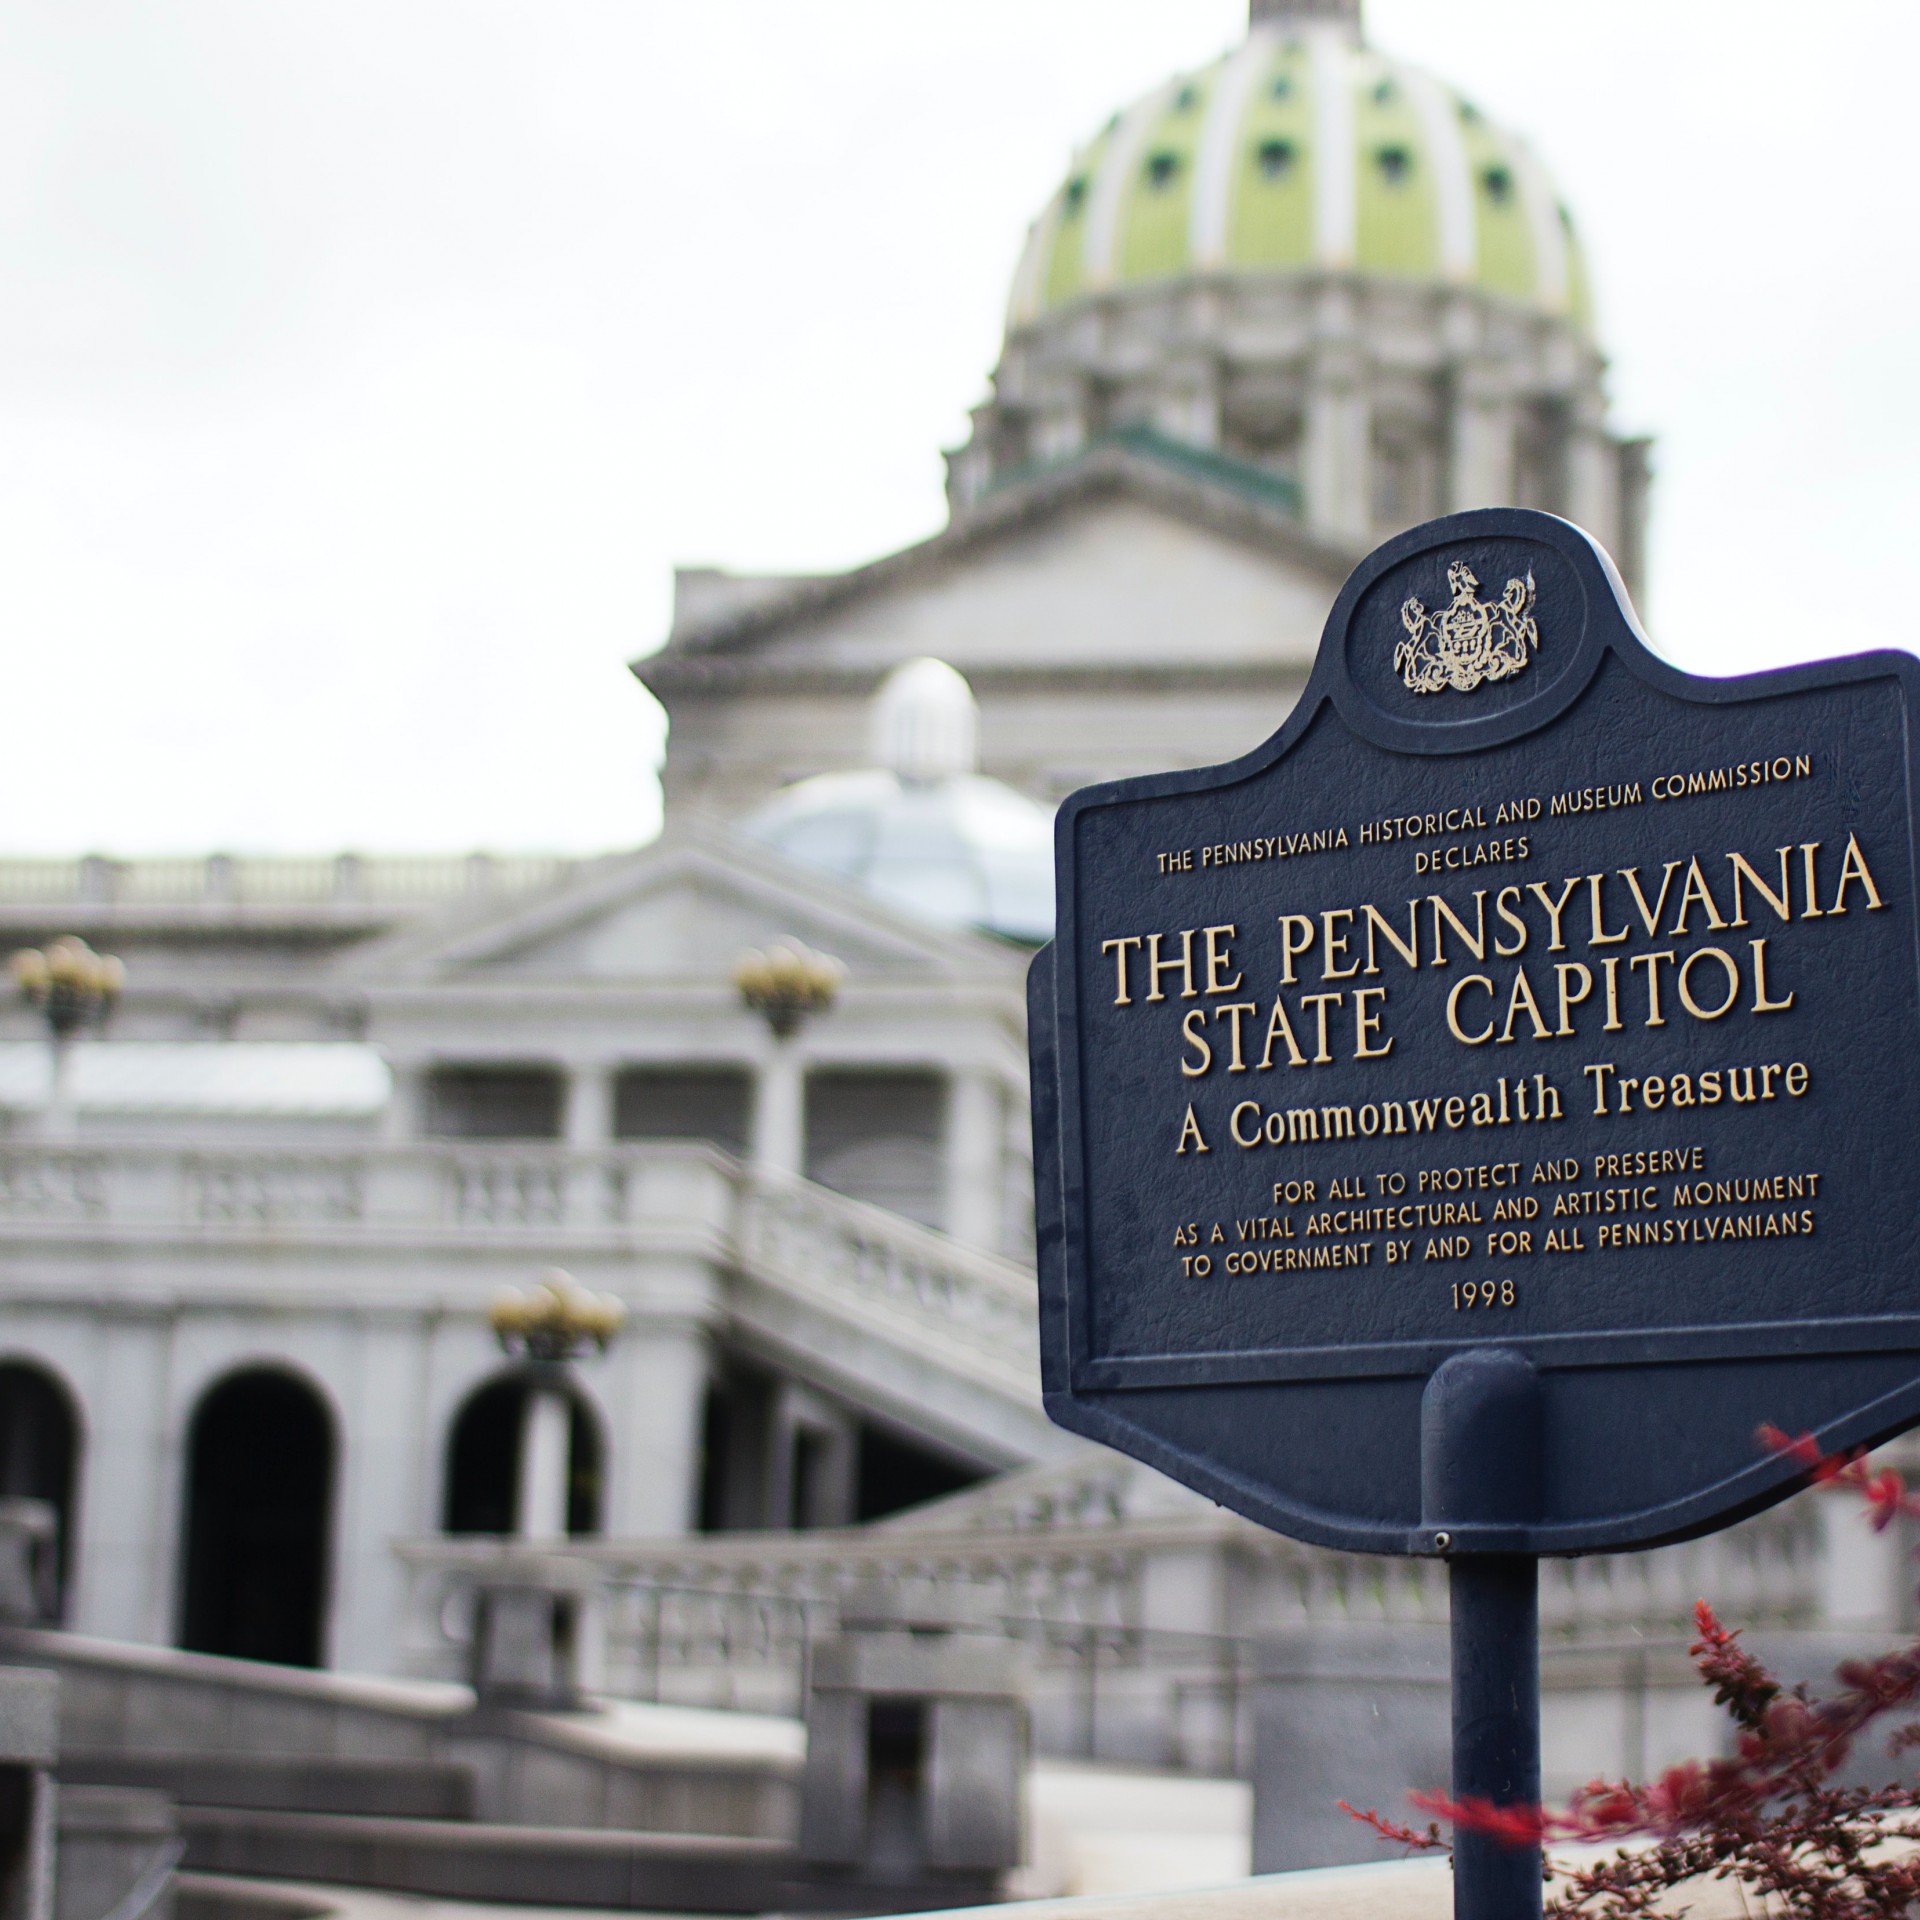 Exterior image of the Pennsylvania State Captial and a sign announing the building in foreground